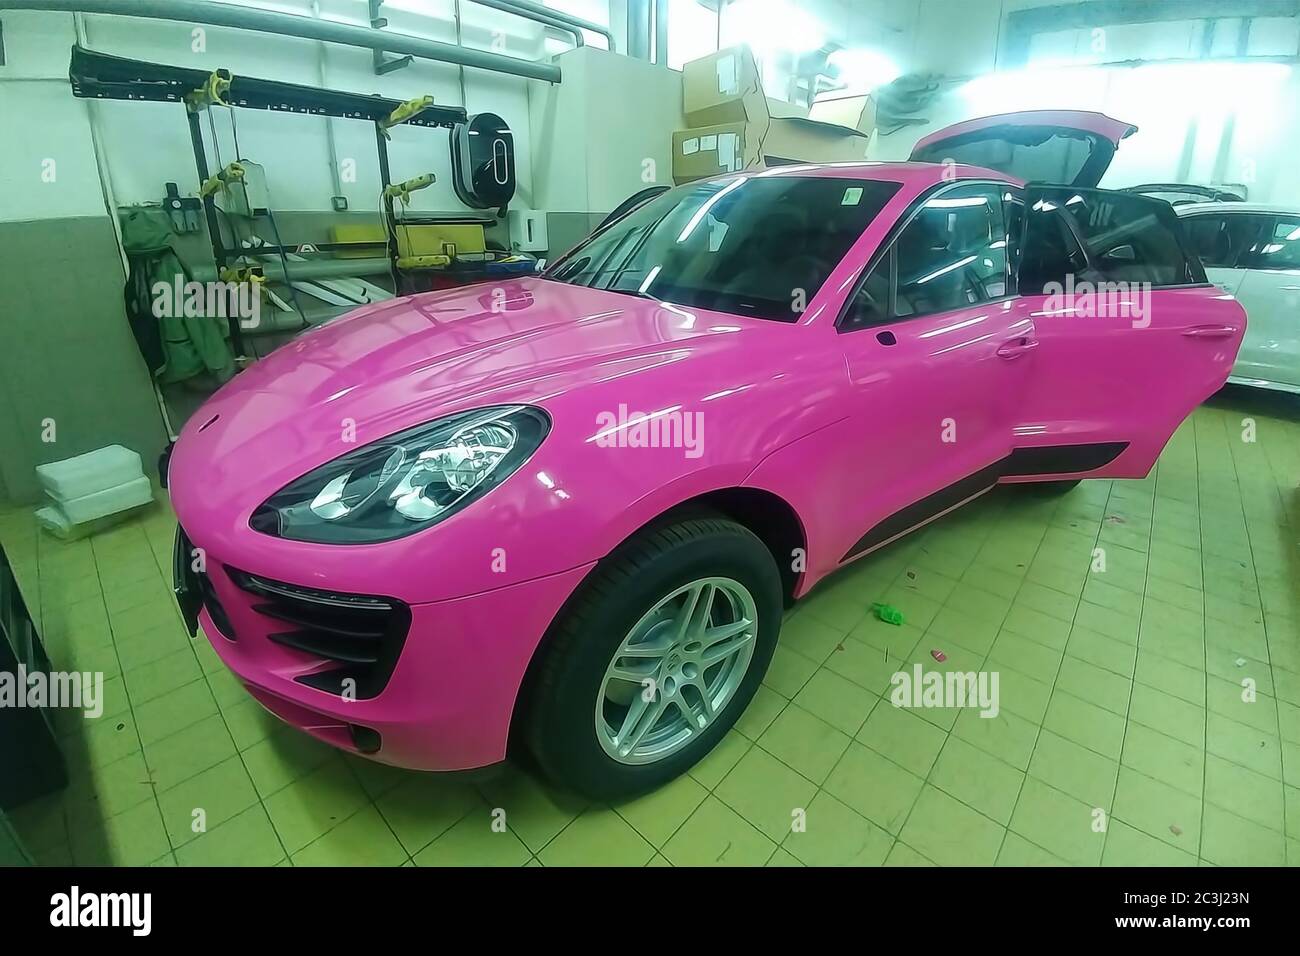 Moscow, Russia - May 09, 2019: Porsche Macan in service center, car wrapping, putting pink vinyl foil or film on car. Stock Photo